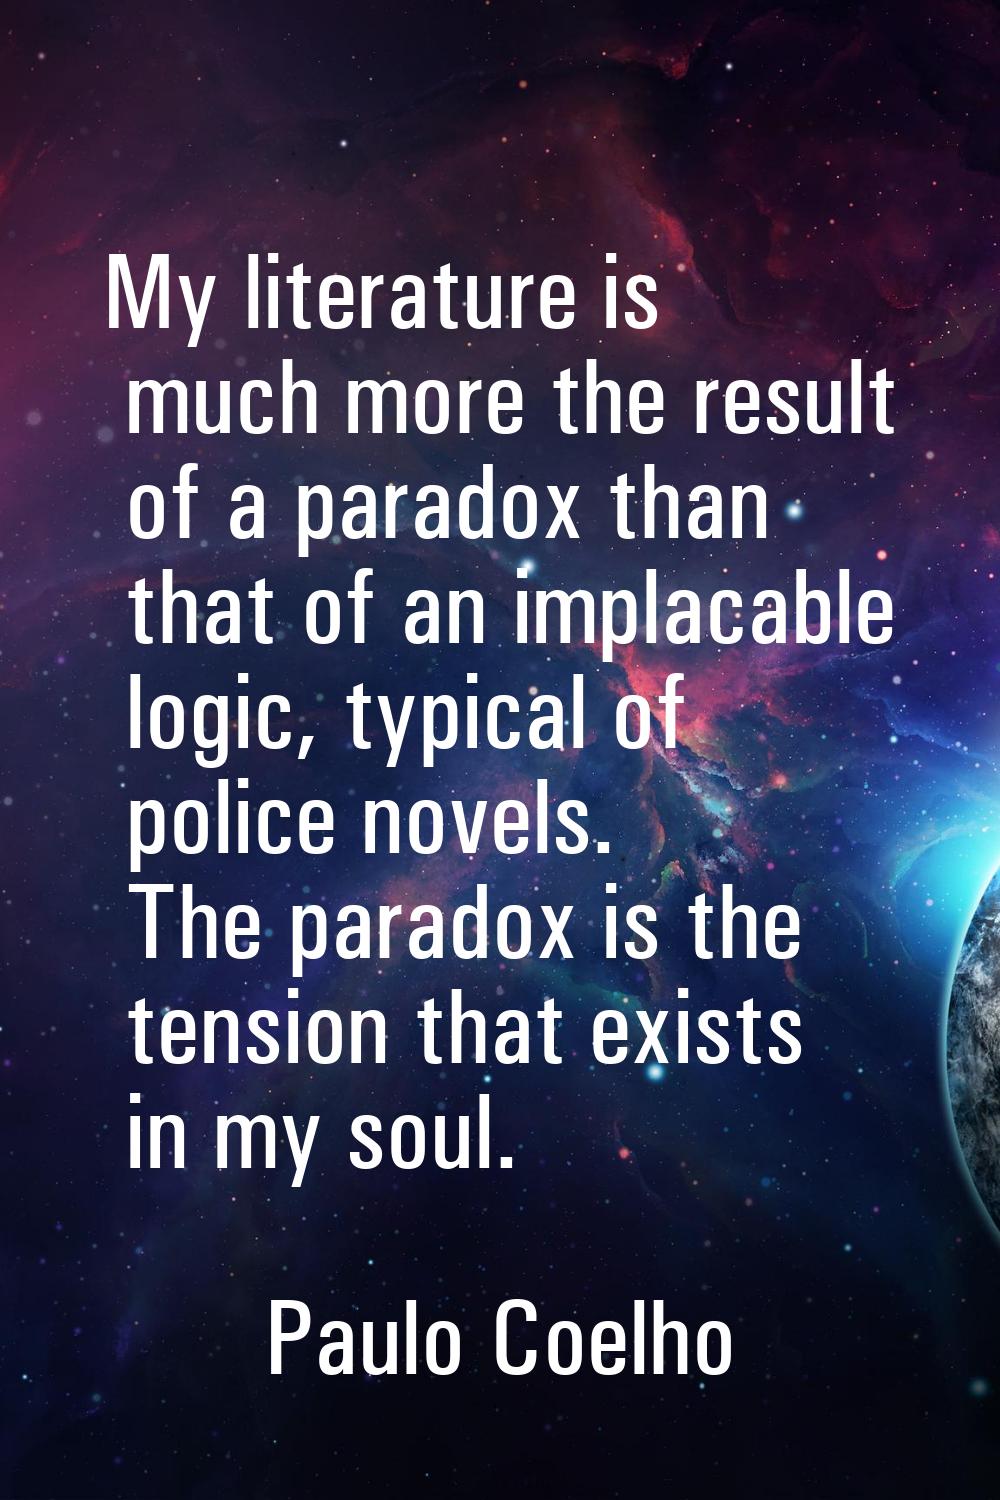 My literature is much more the result of a paradox than that of an implacable logic, typical of pol